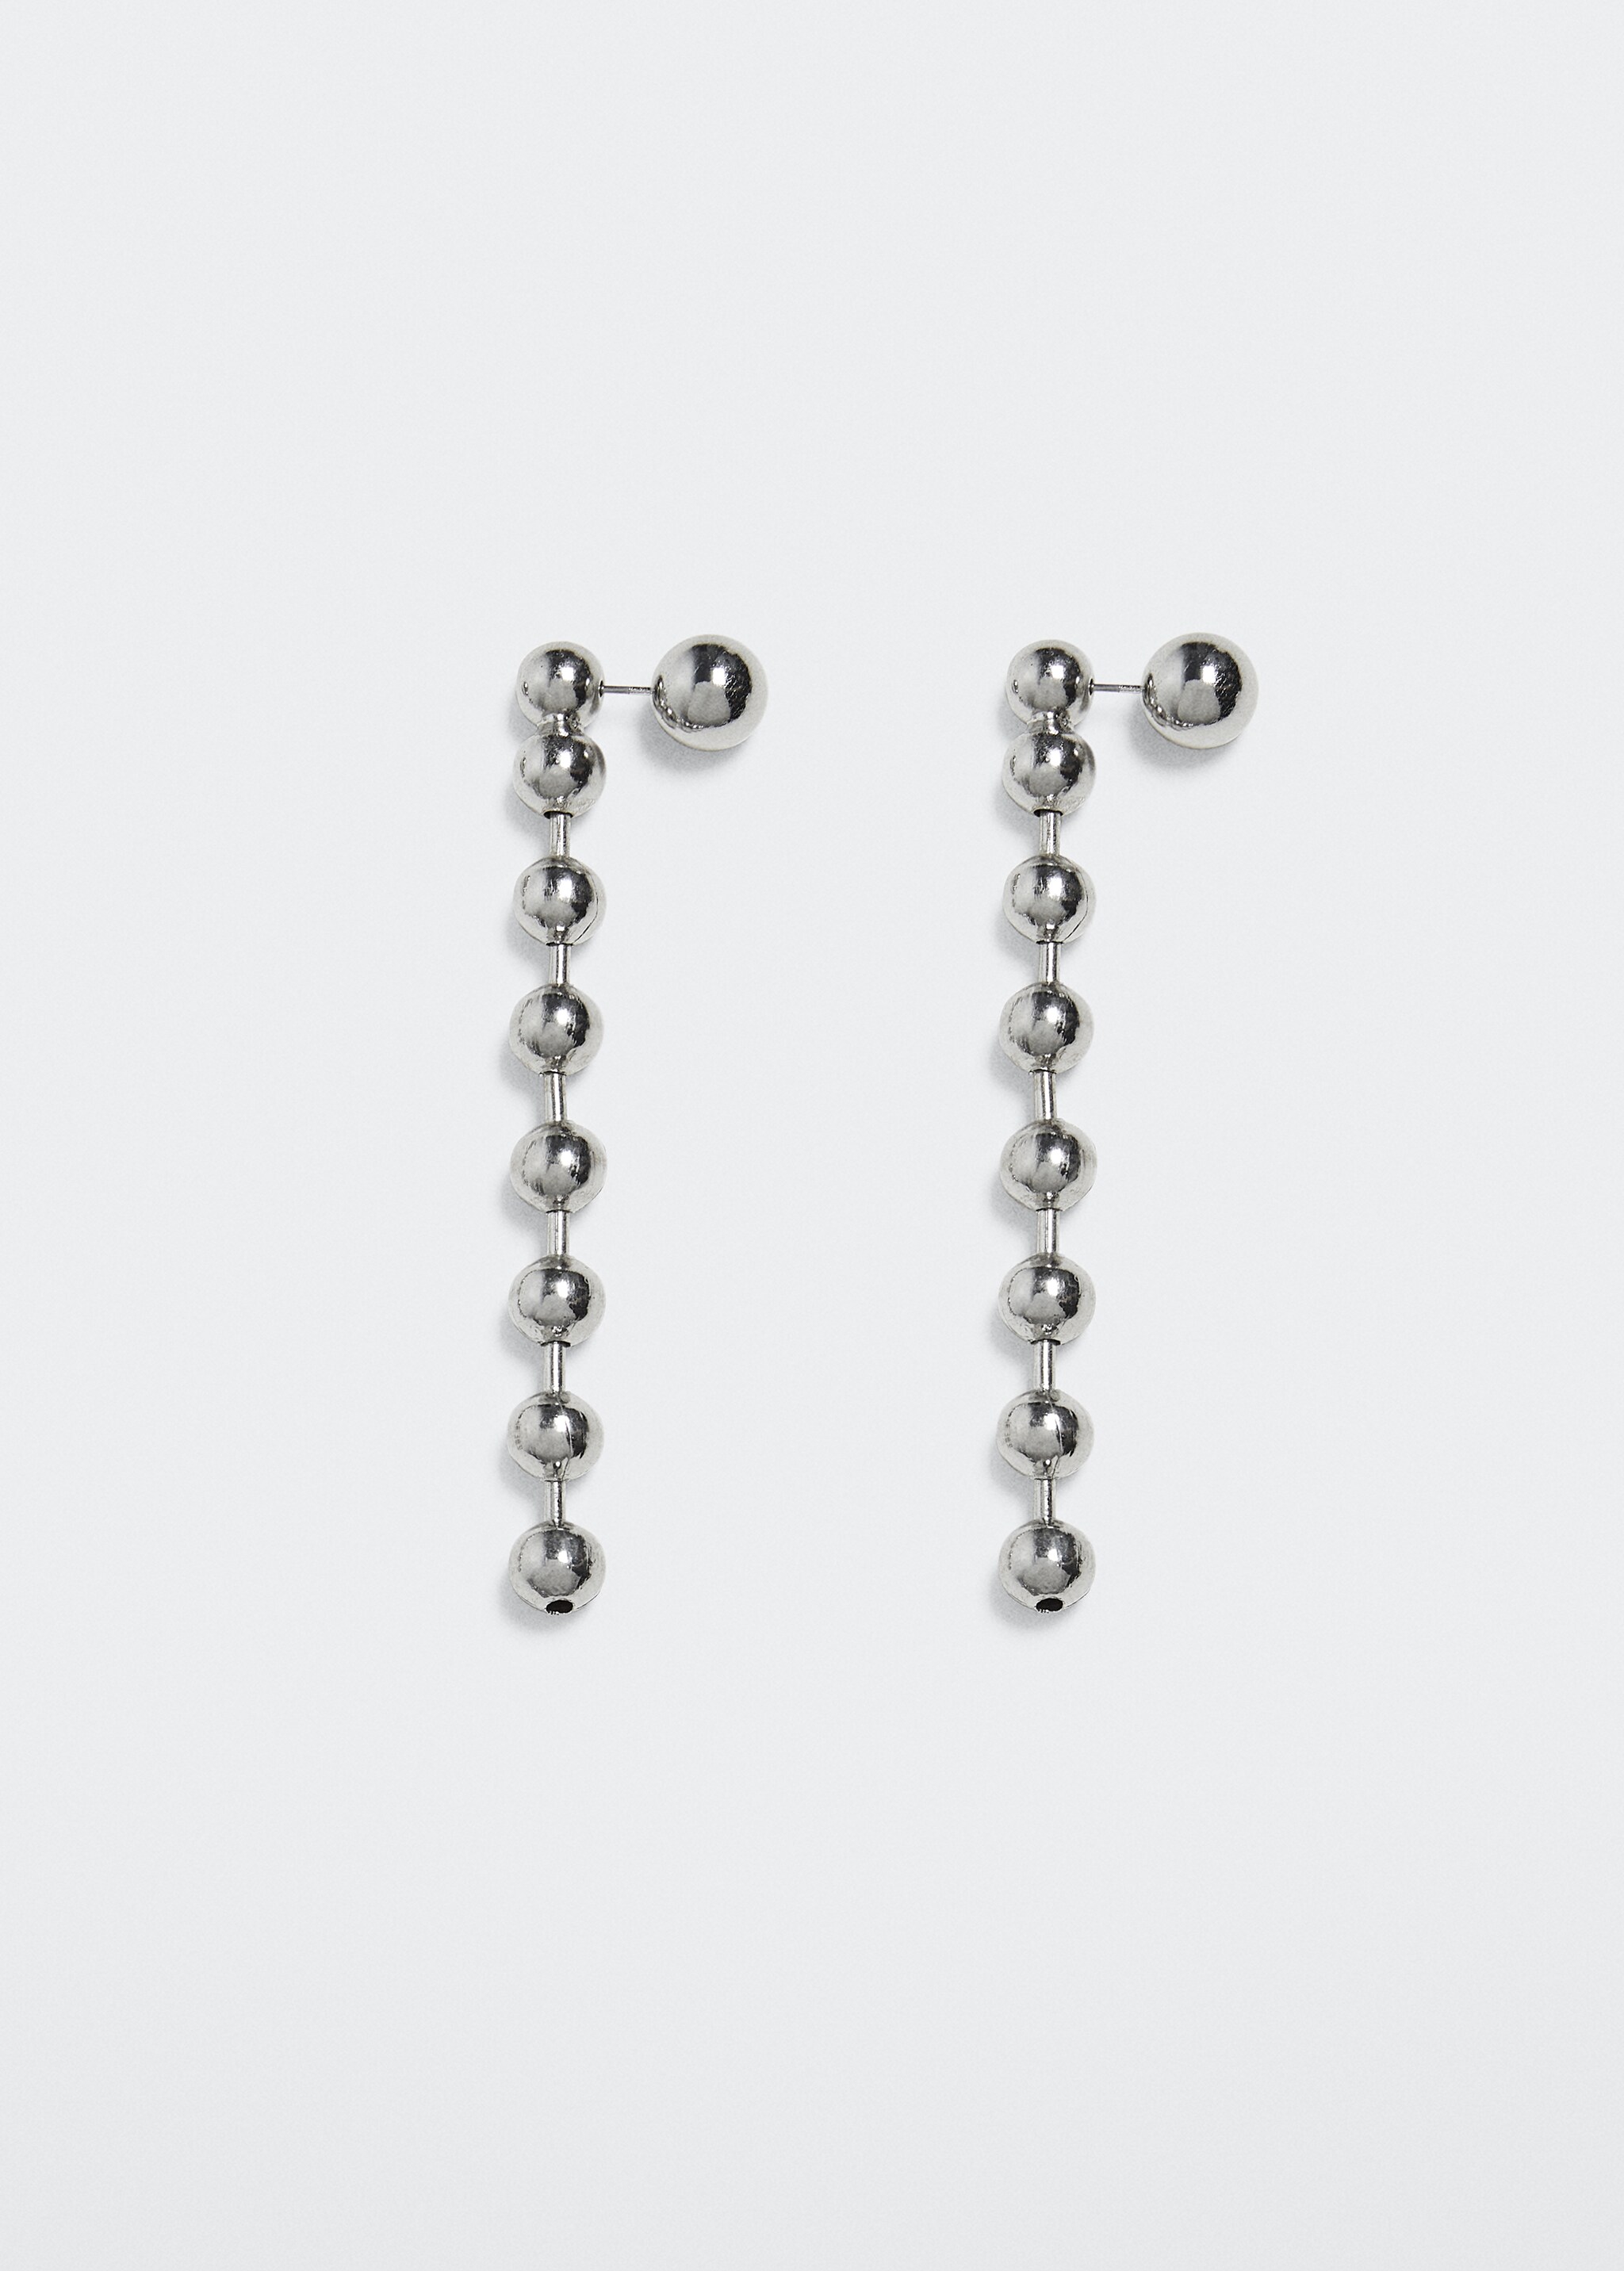 Metal bead earrings - Article without model